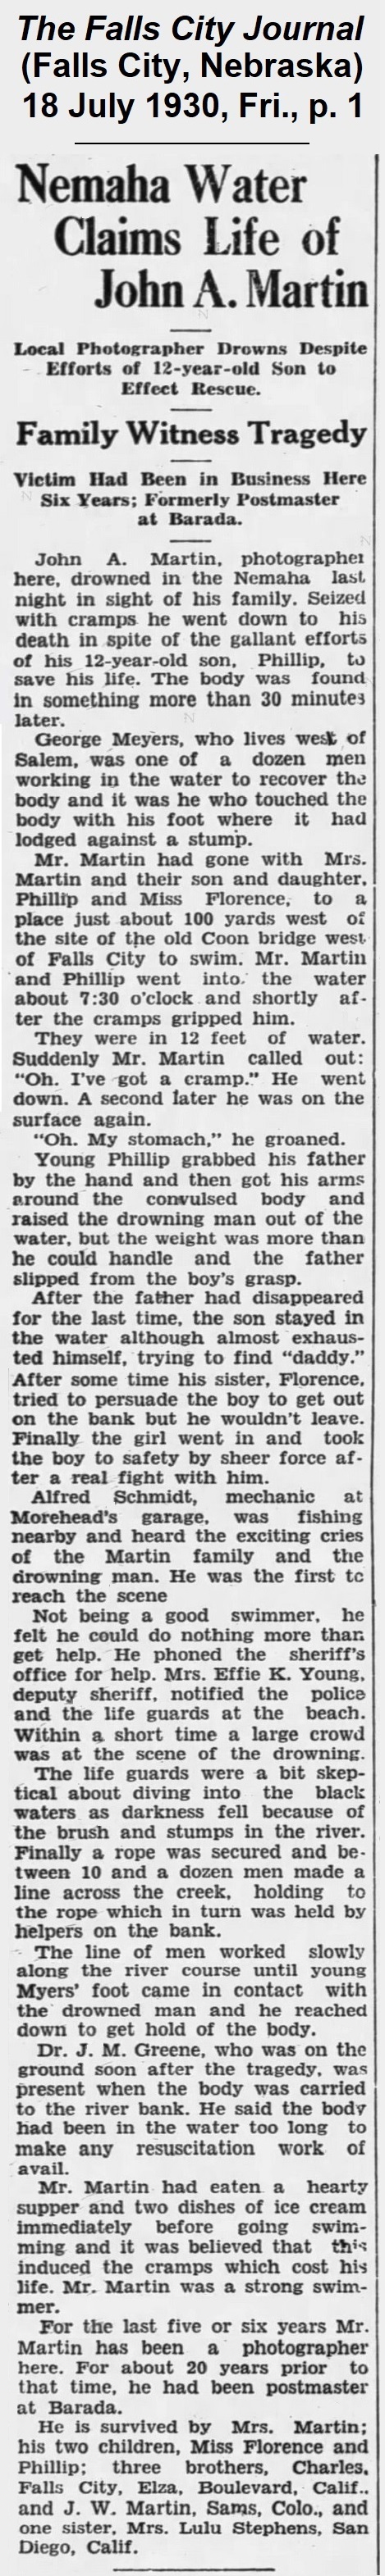 Report from The Falls City Journal
              of 18 July 1930, headed 'Nemaha Water Claims Life of John A. Martin.'